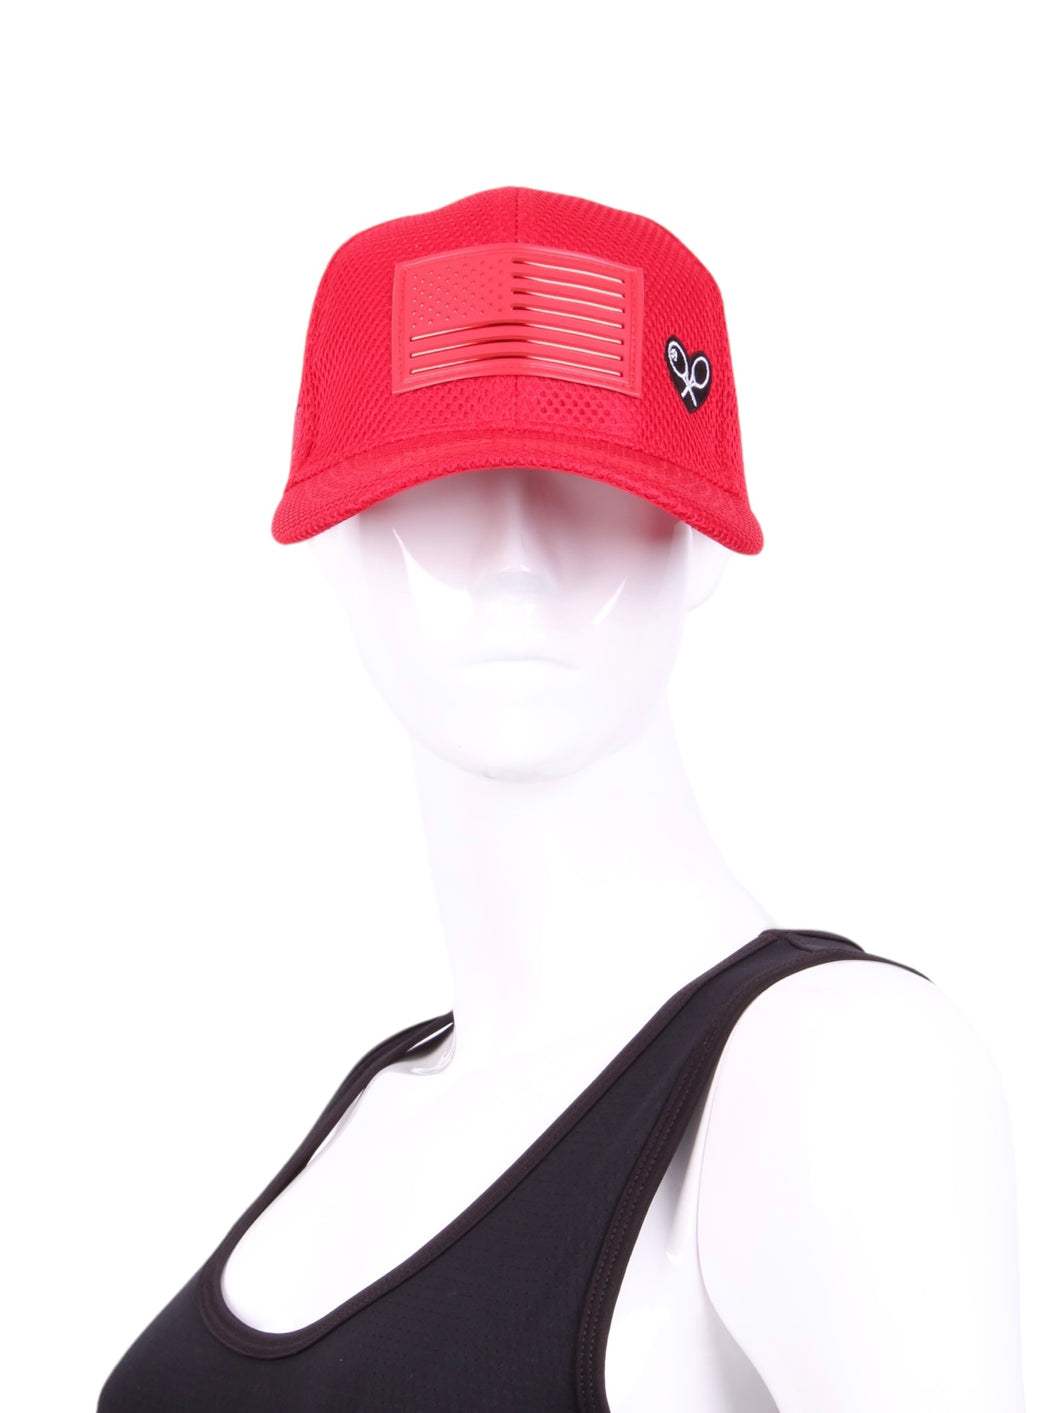 The Red USA Tennis Hat is a sporty accessory designed for tennis enthusiasts and fans of the sport. It is typically made from lightweight and breathable materials to ensure comfort during physical activities. The hat features a classic cap design with a curved brim that helps shield the wearer's face from the sun's rays.